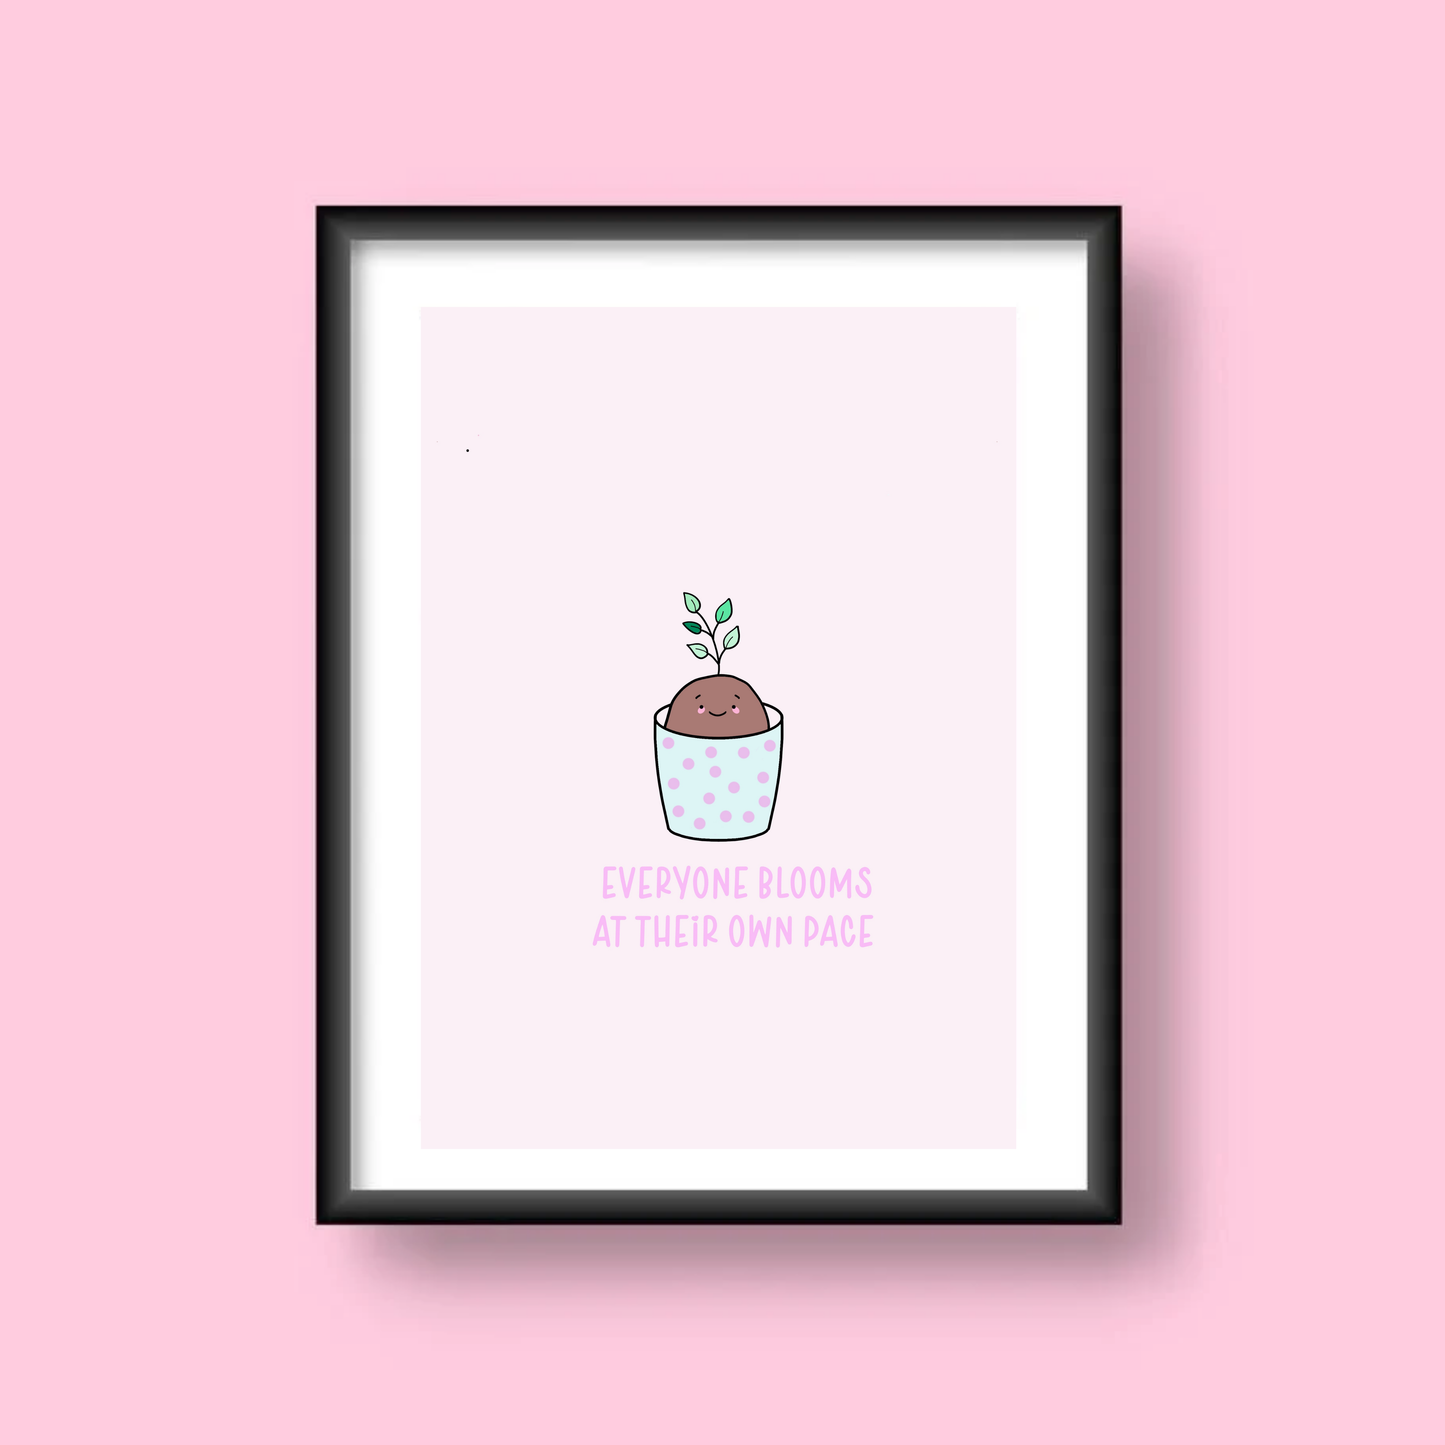 Everyone blooms at their own pace postcard mini print